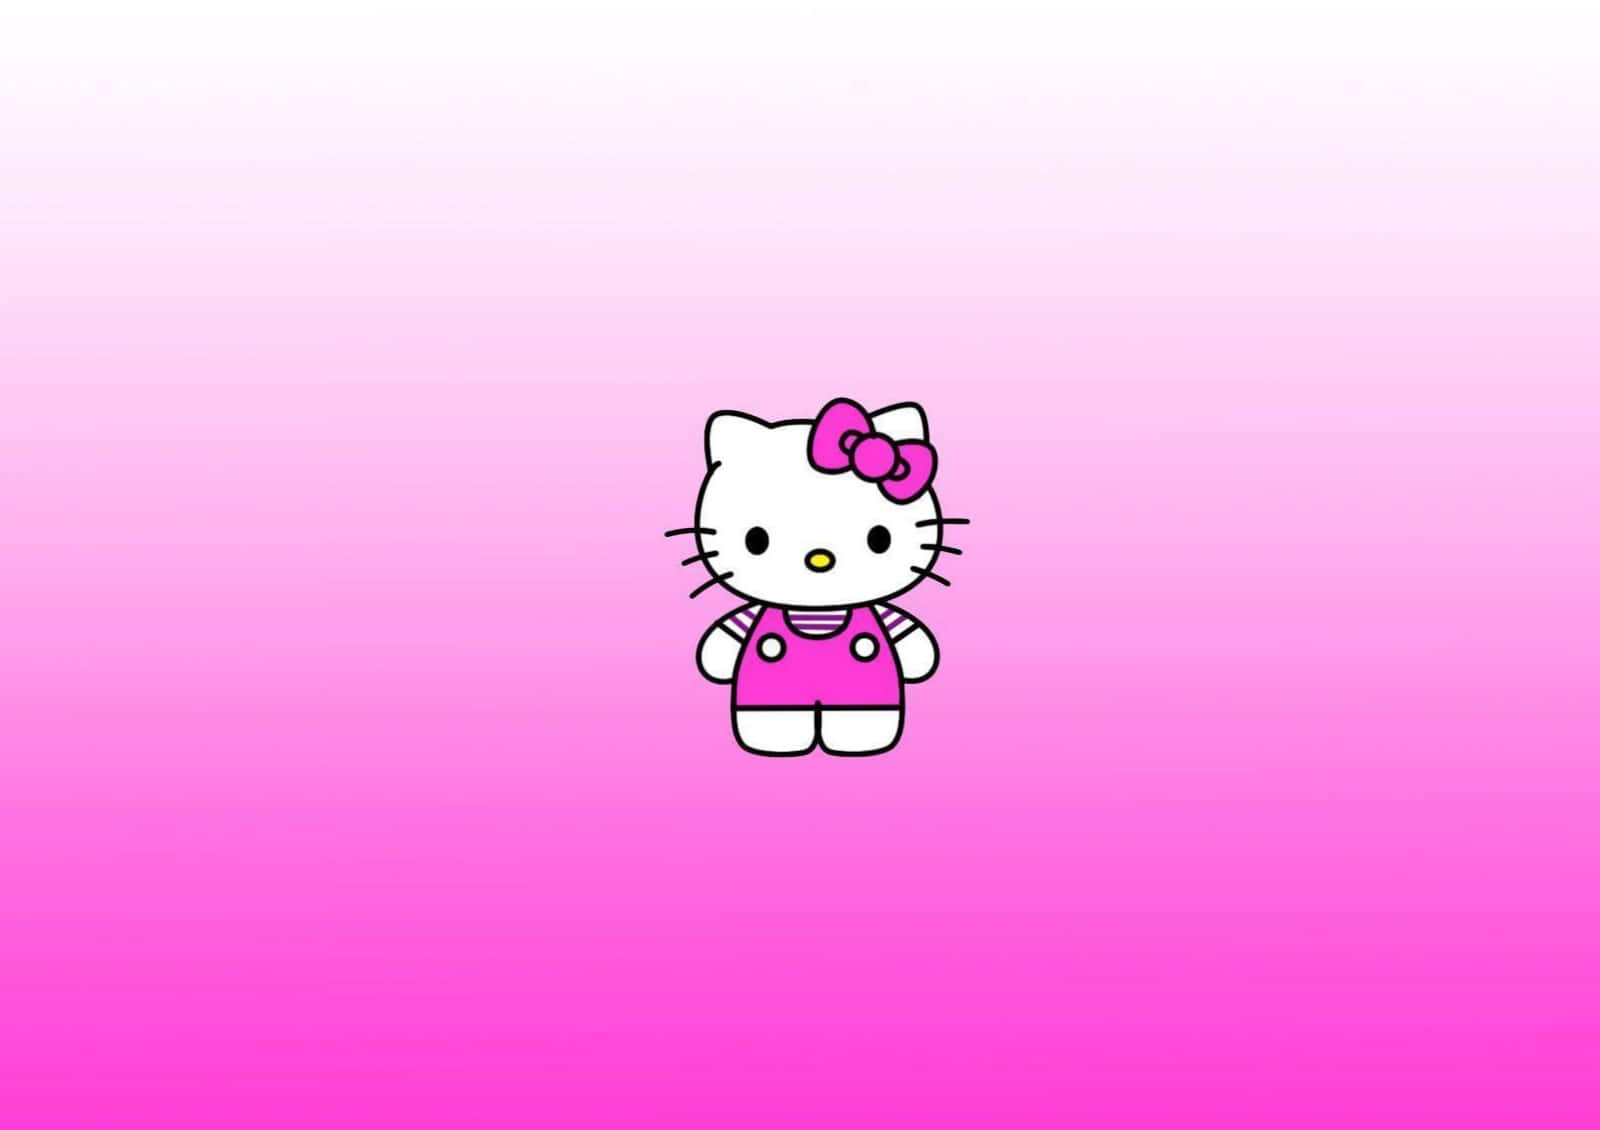 Get Supercharged With This Cute And Professional Hello Kitty Inspired Laptop Background